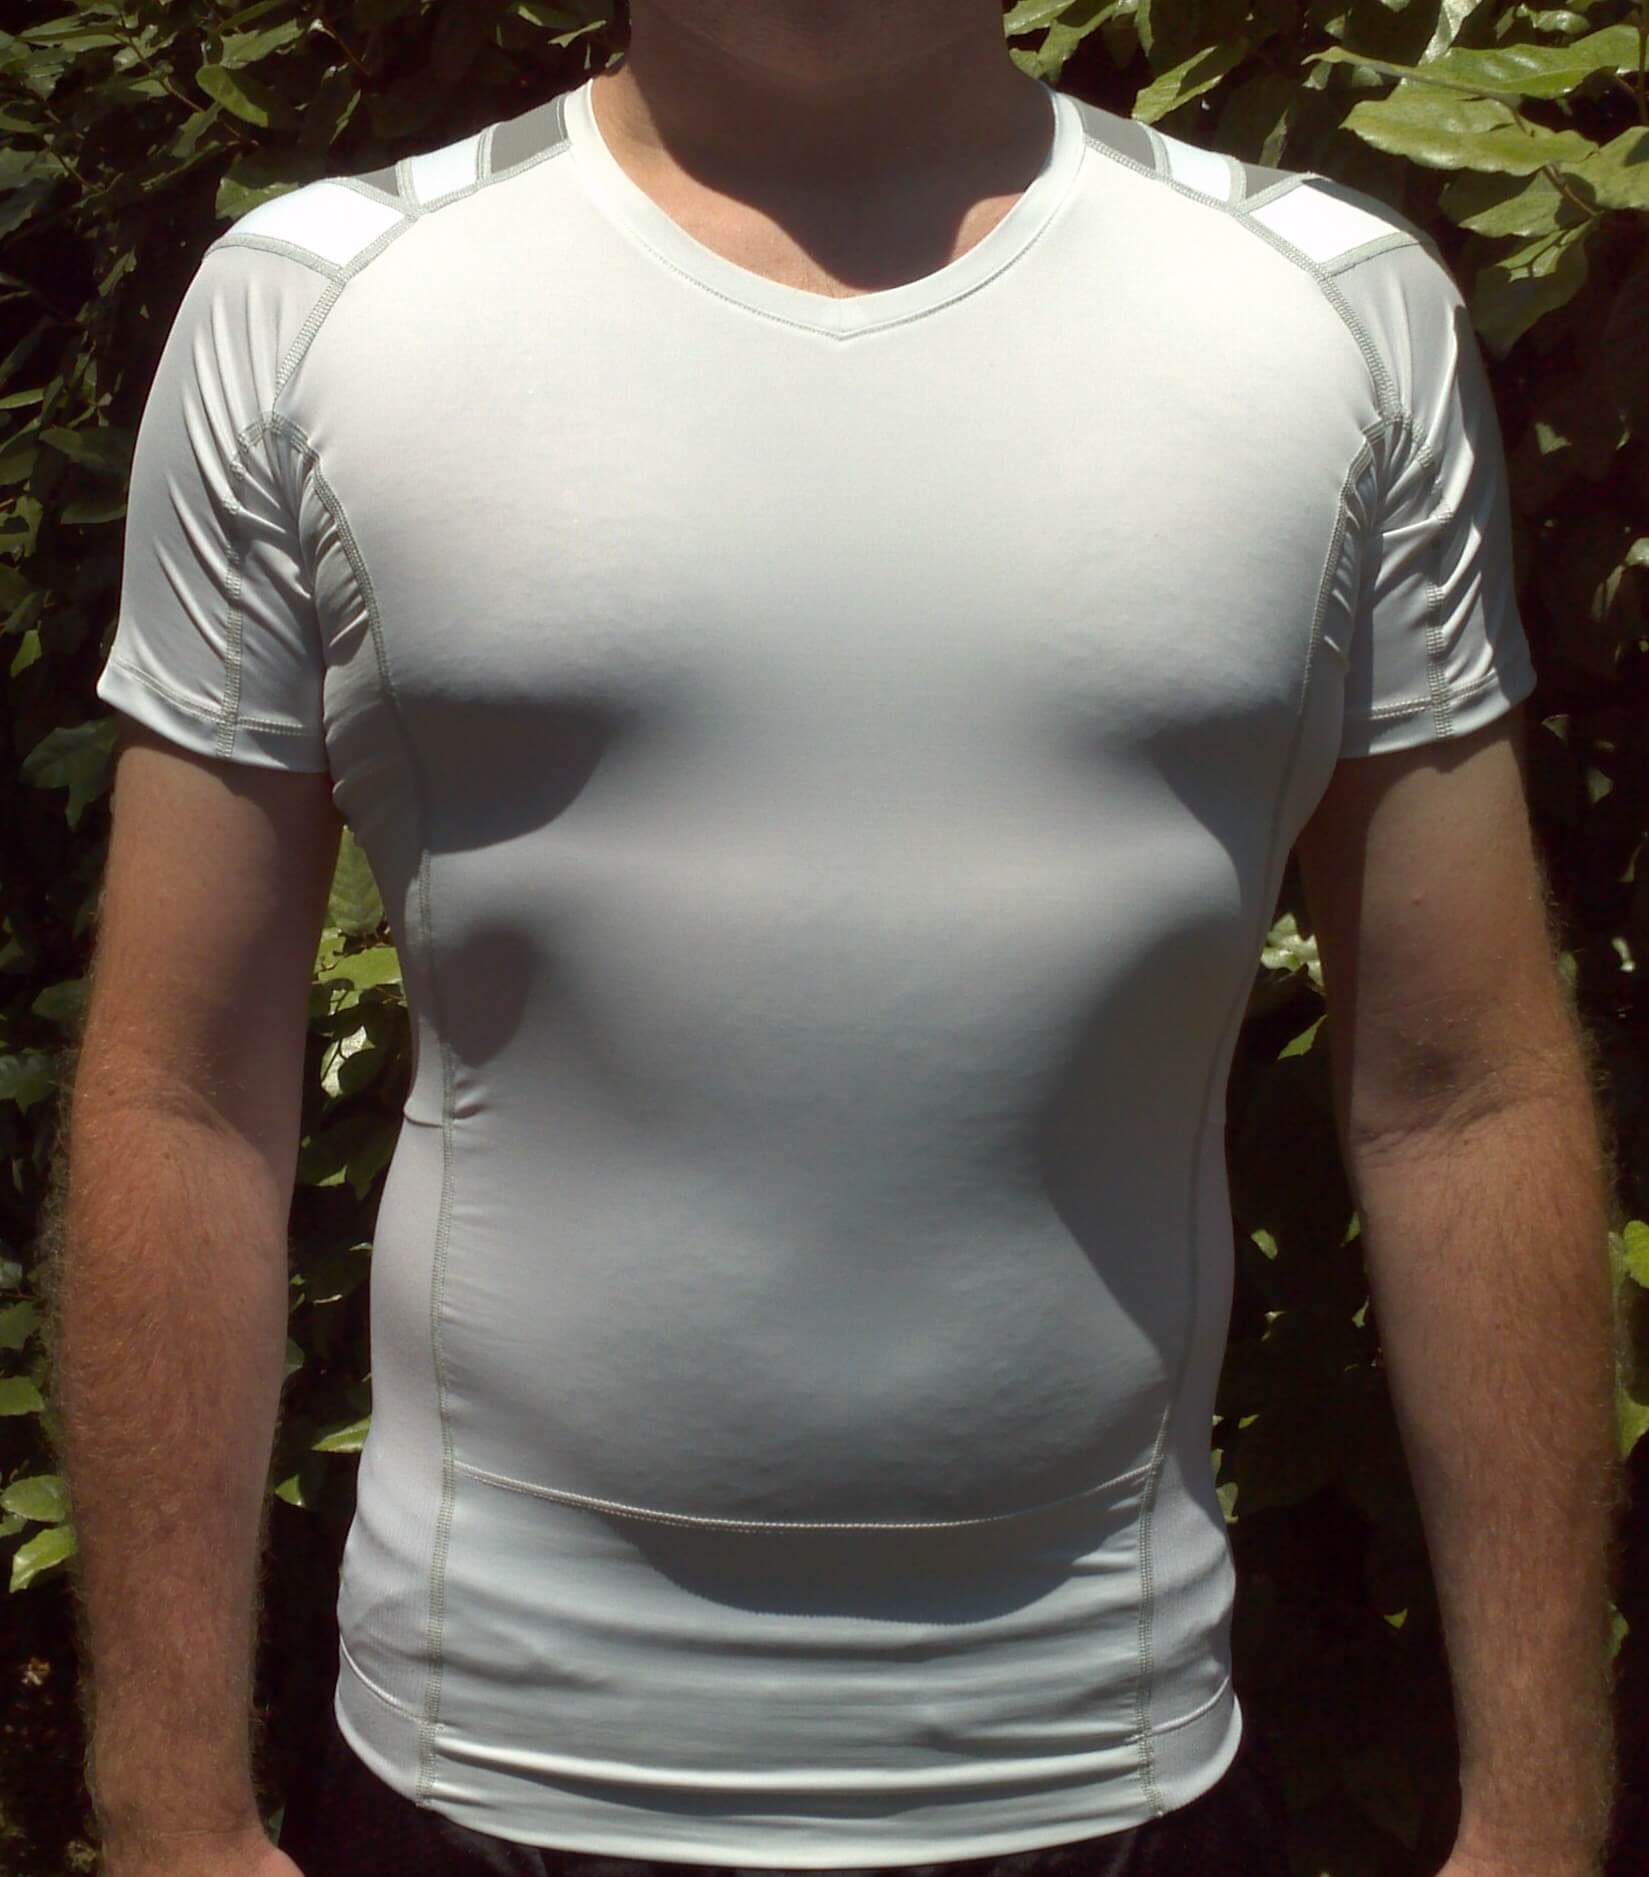 AlignMed Posture Shirt Fitting & Review 